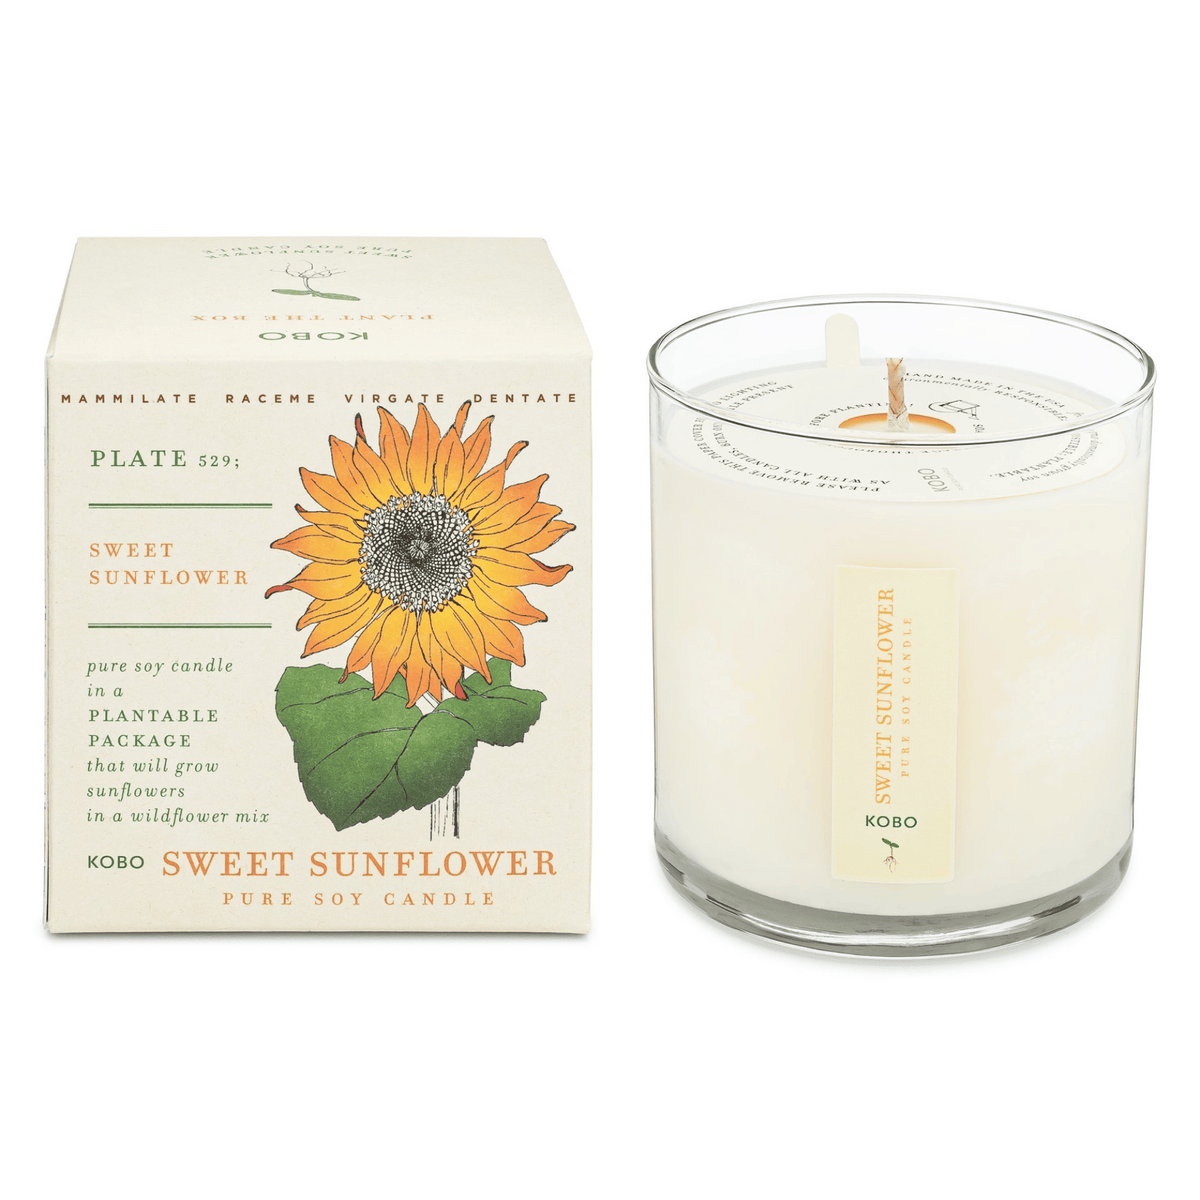 Primary Image of Sweet Sunflower Plant the Box Candle